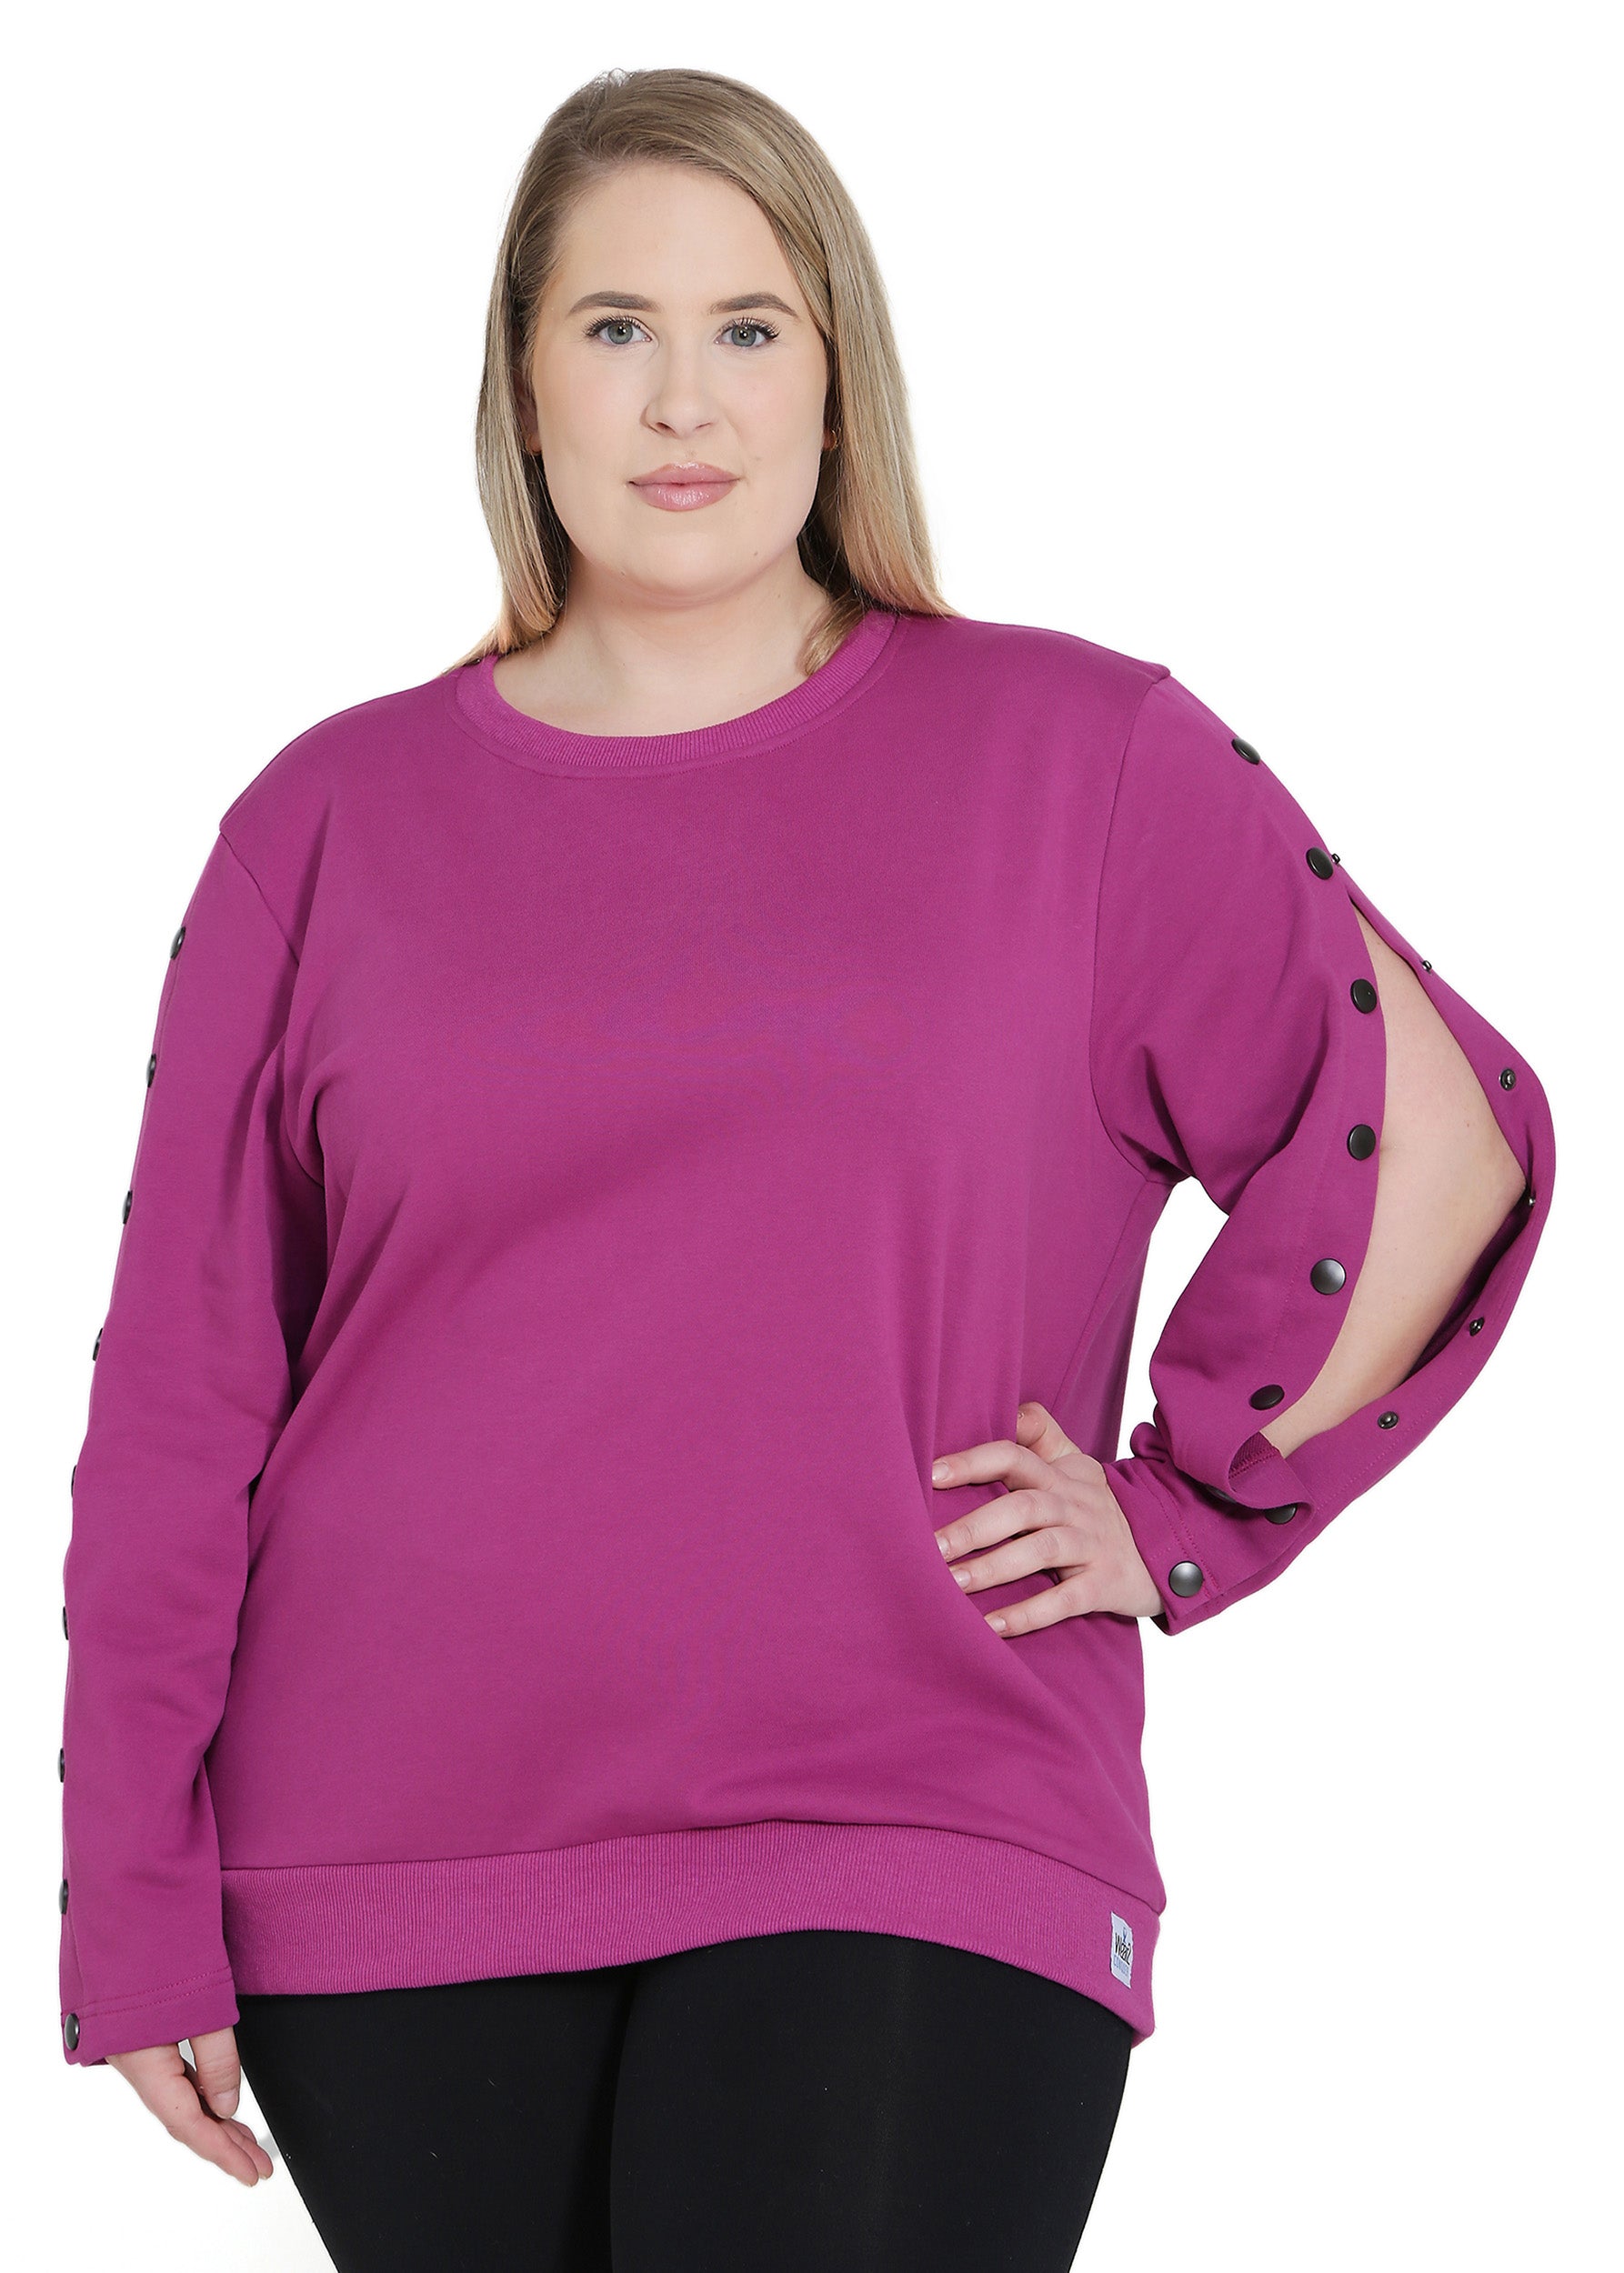 Plus Size arm port access dialysis shirt, perfect gift for dialysis patients